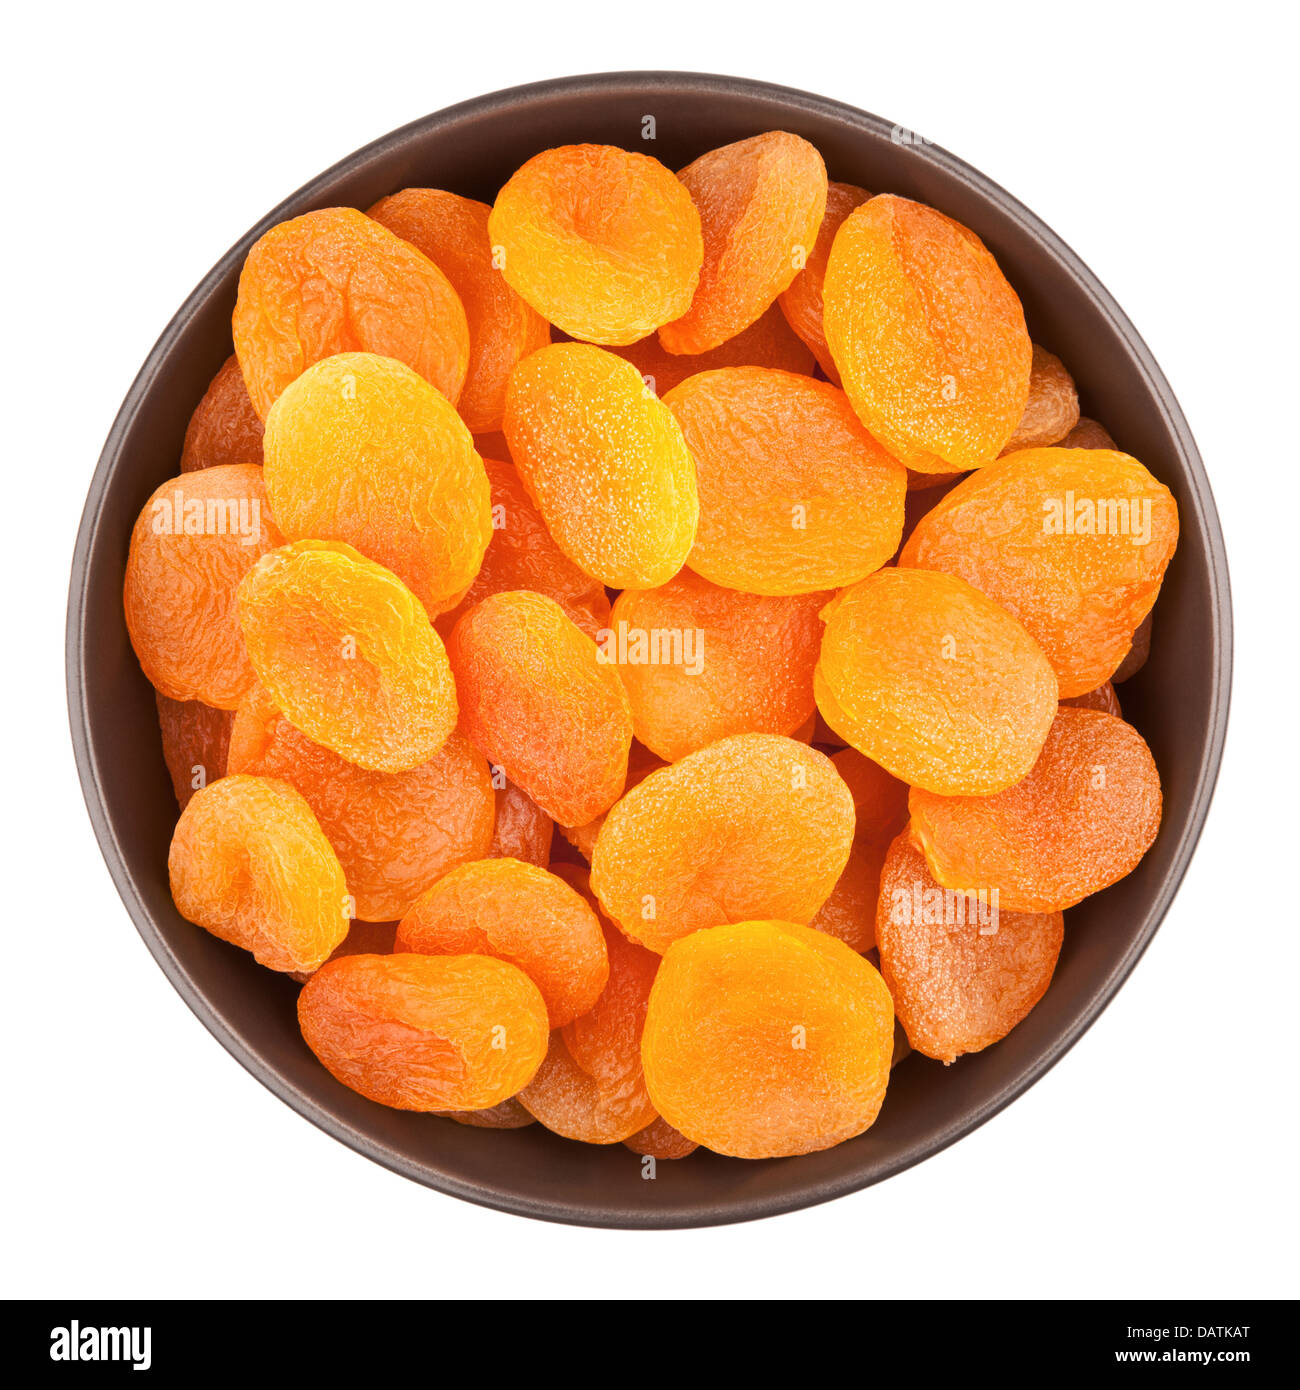 Bowl With Dried Apricots Stock Photo